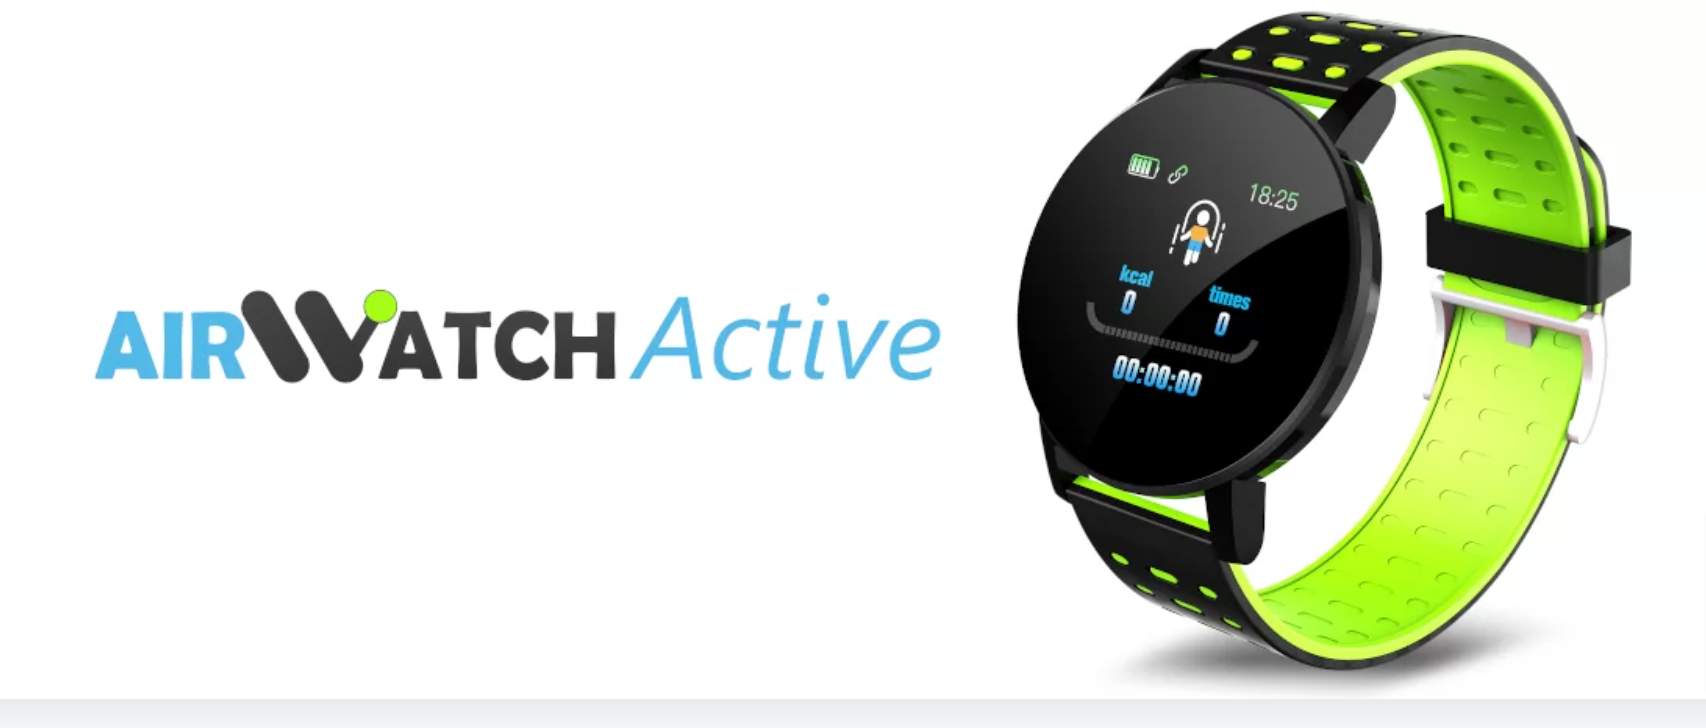 Air Watch Active Image